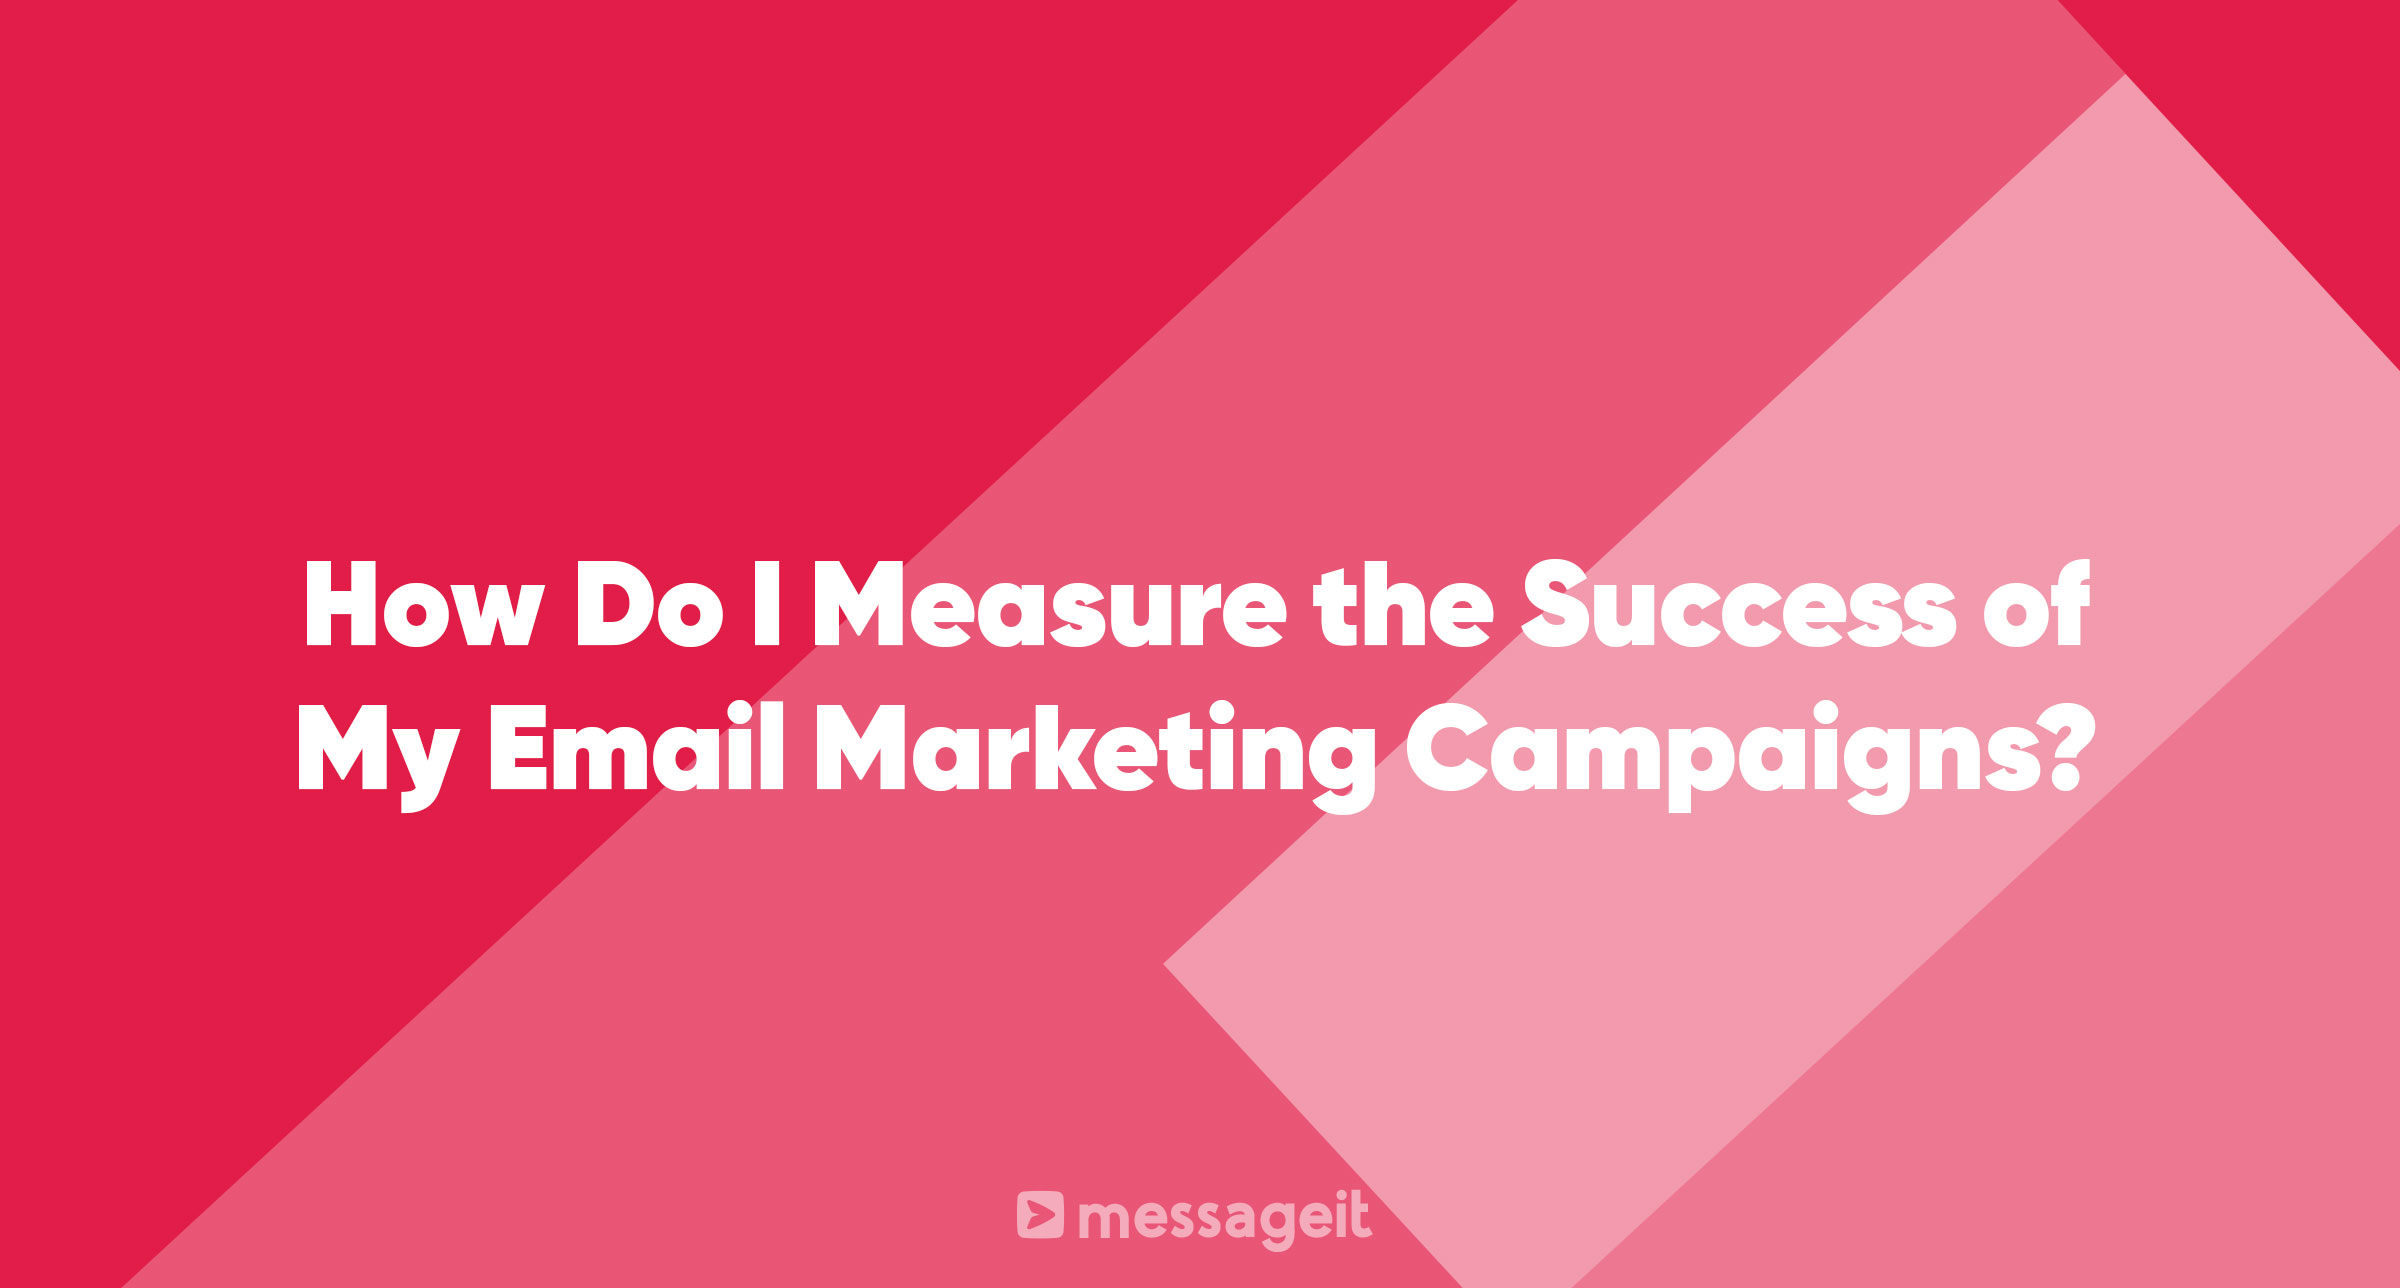 Article | How Do I Measure the Success of My Email Marketing Campaigns?